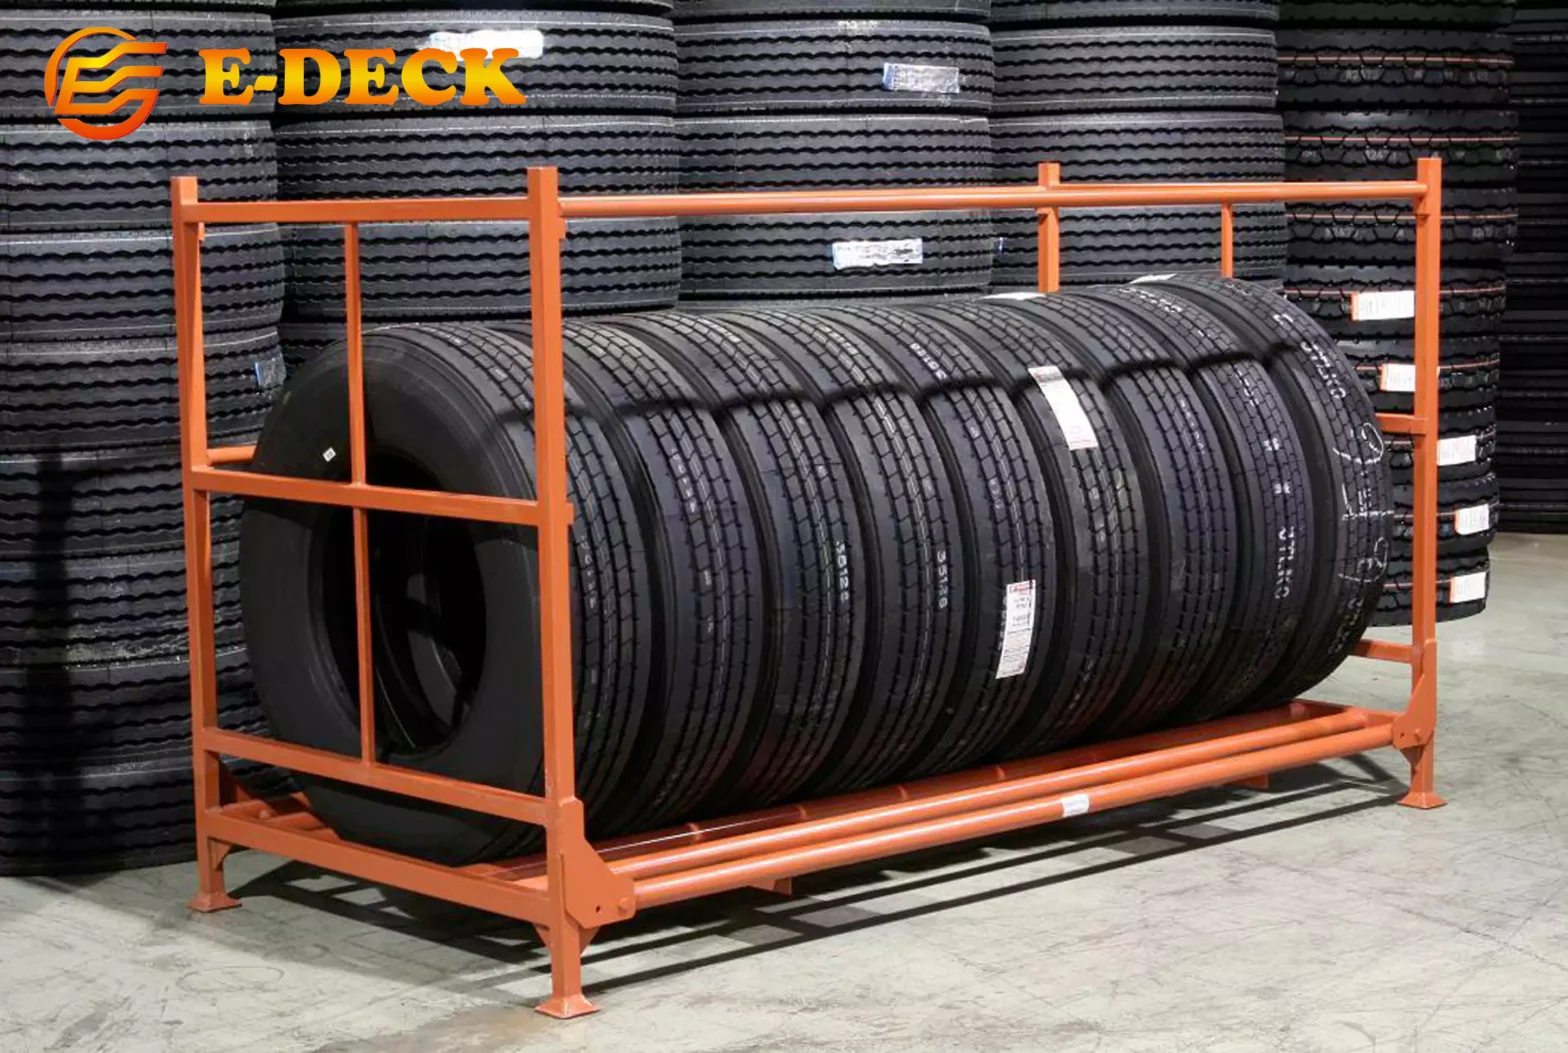 7 Key Factors to Consider Before Investing in a Tire Storage System